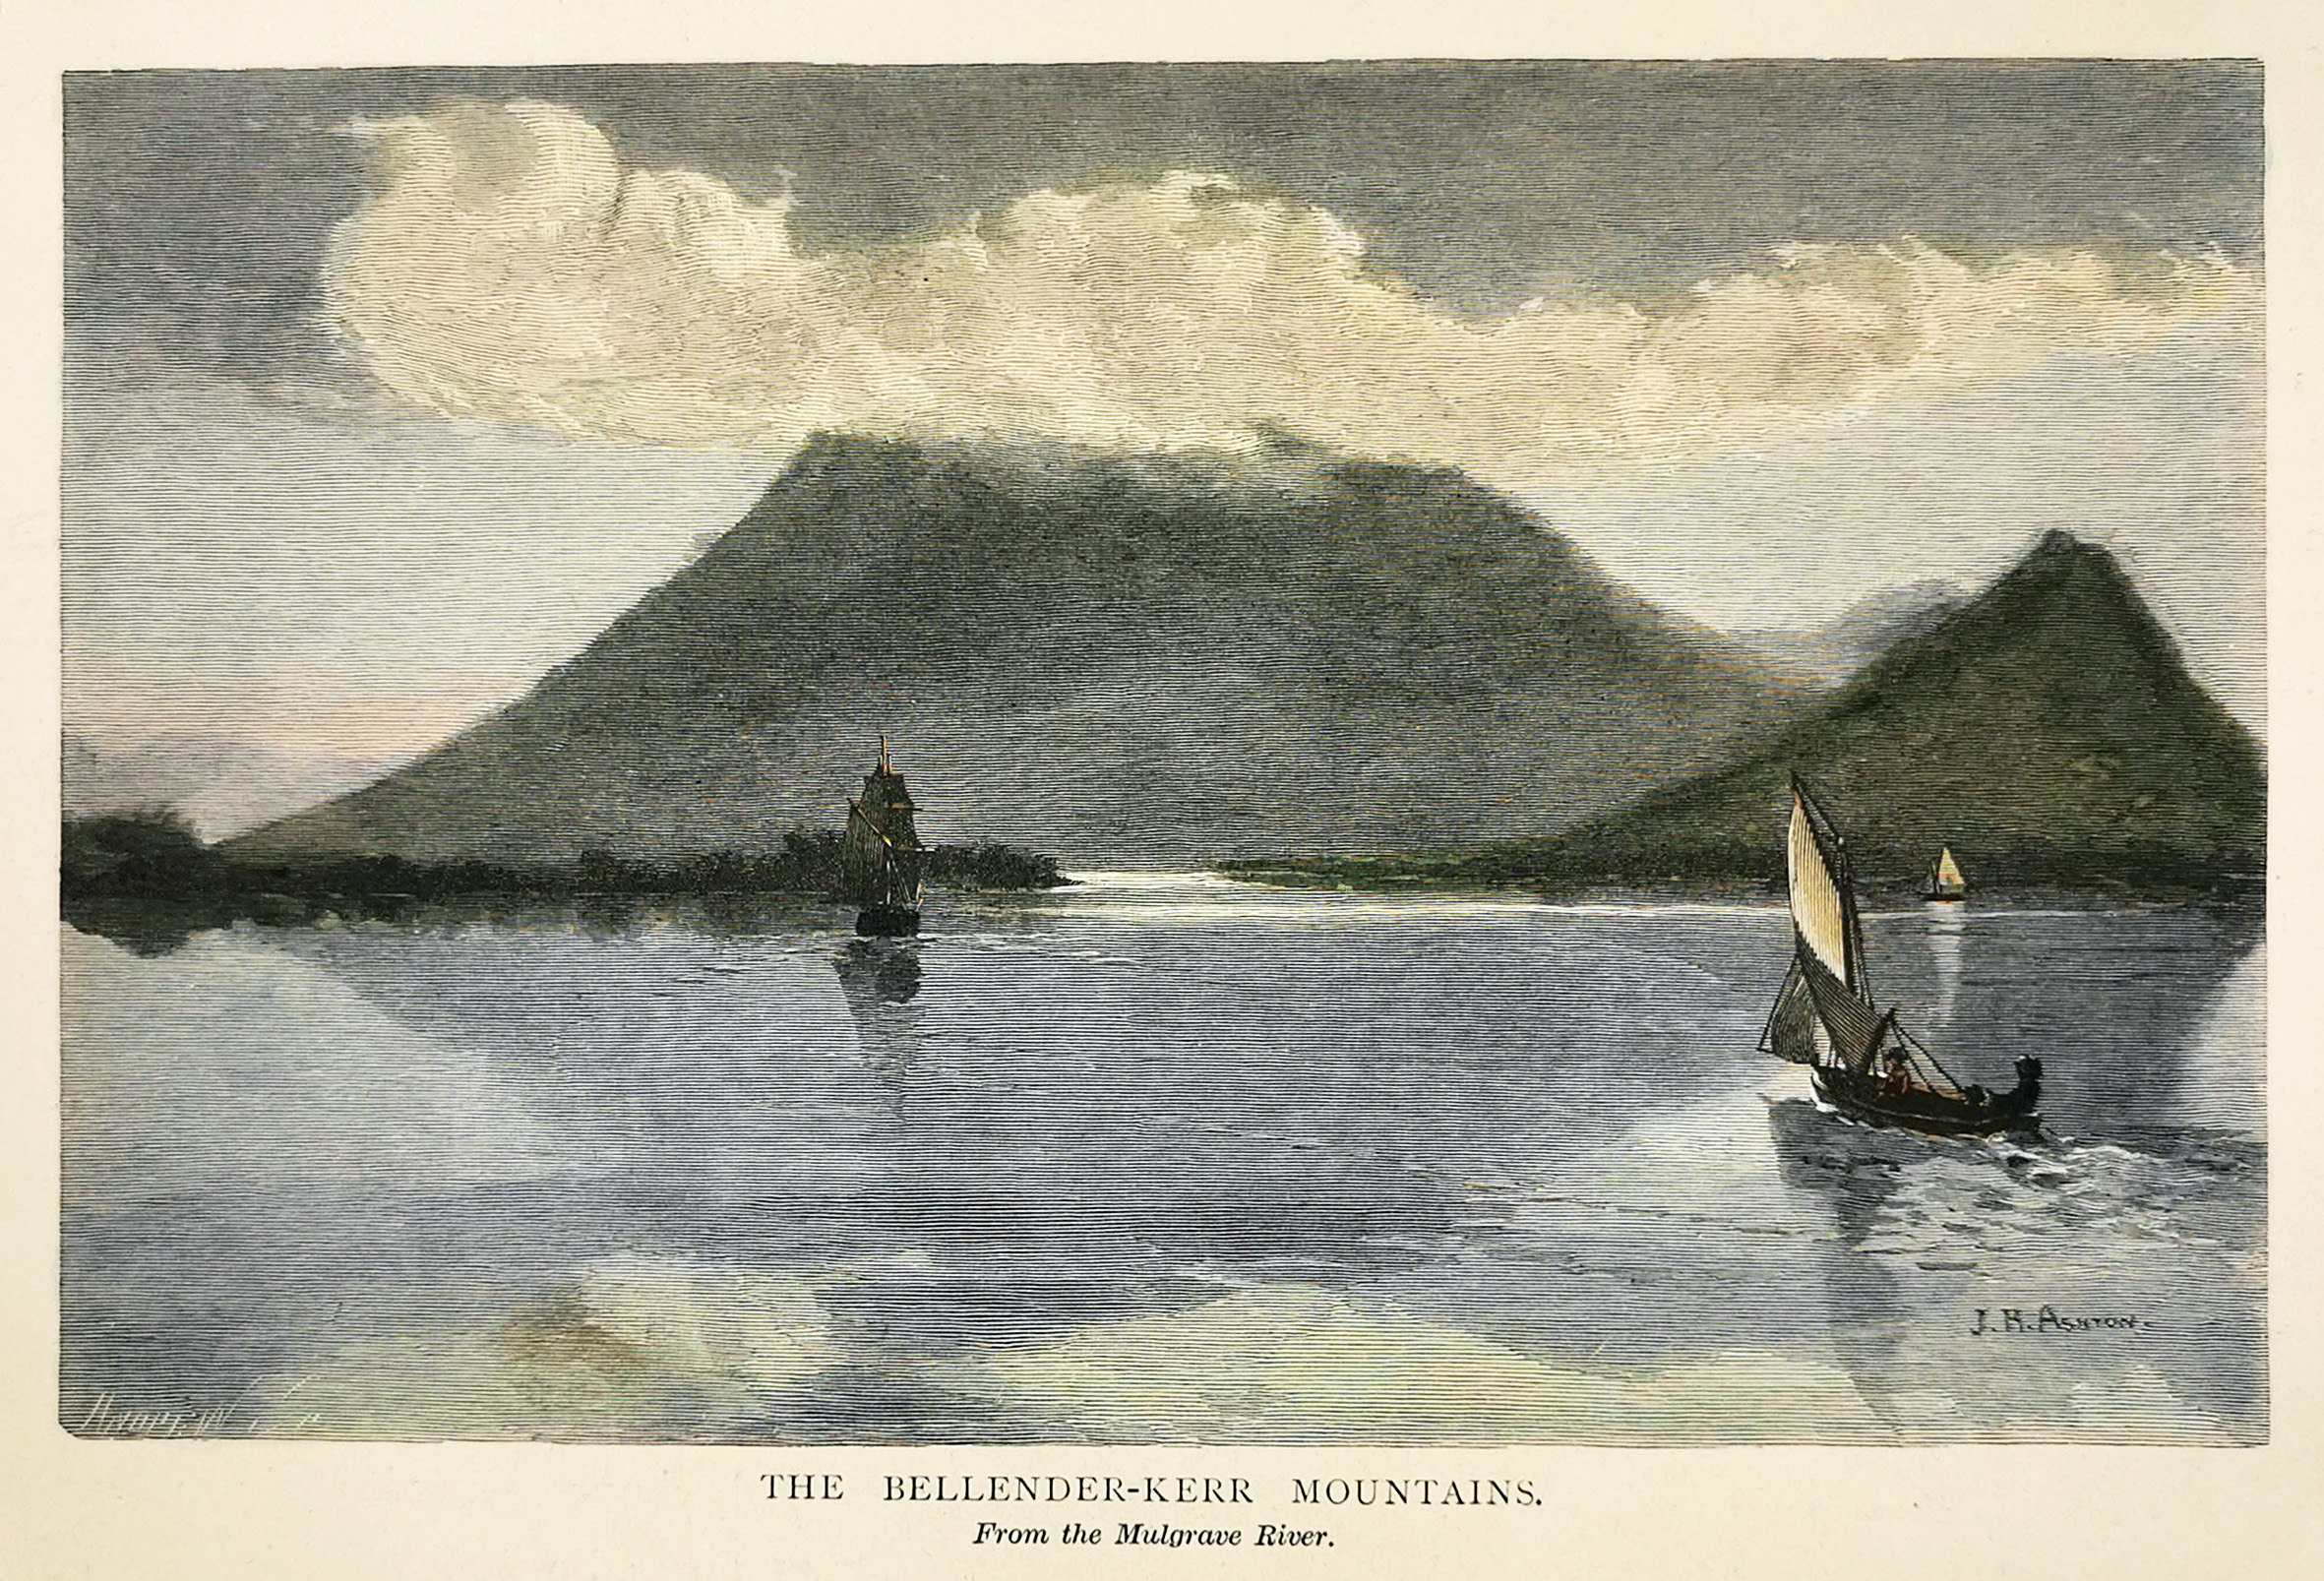 The Bellender-Kerr Mountains from the Mulgrave River - Antique Print from 1886